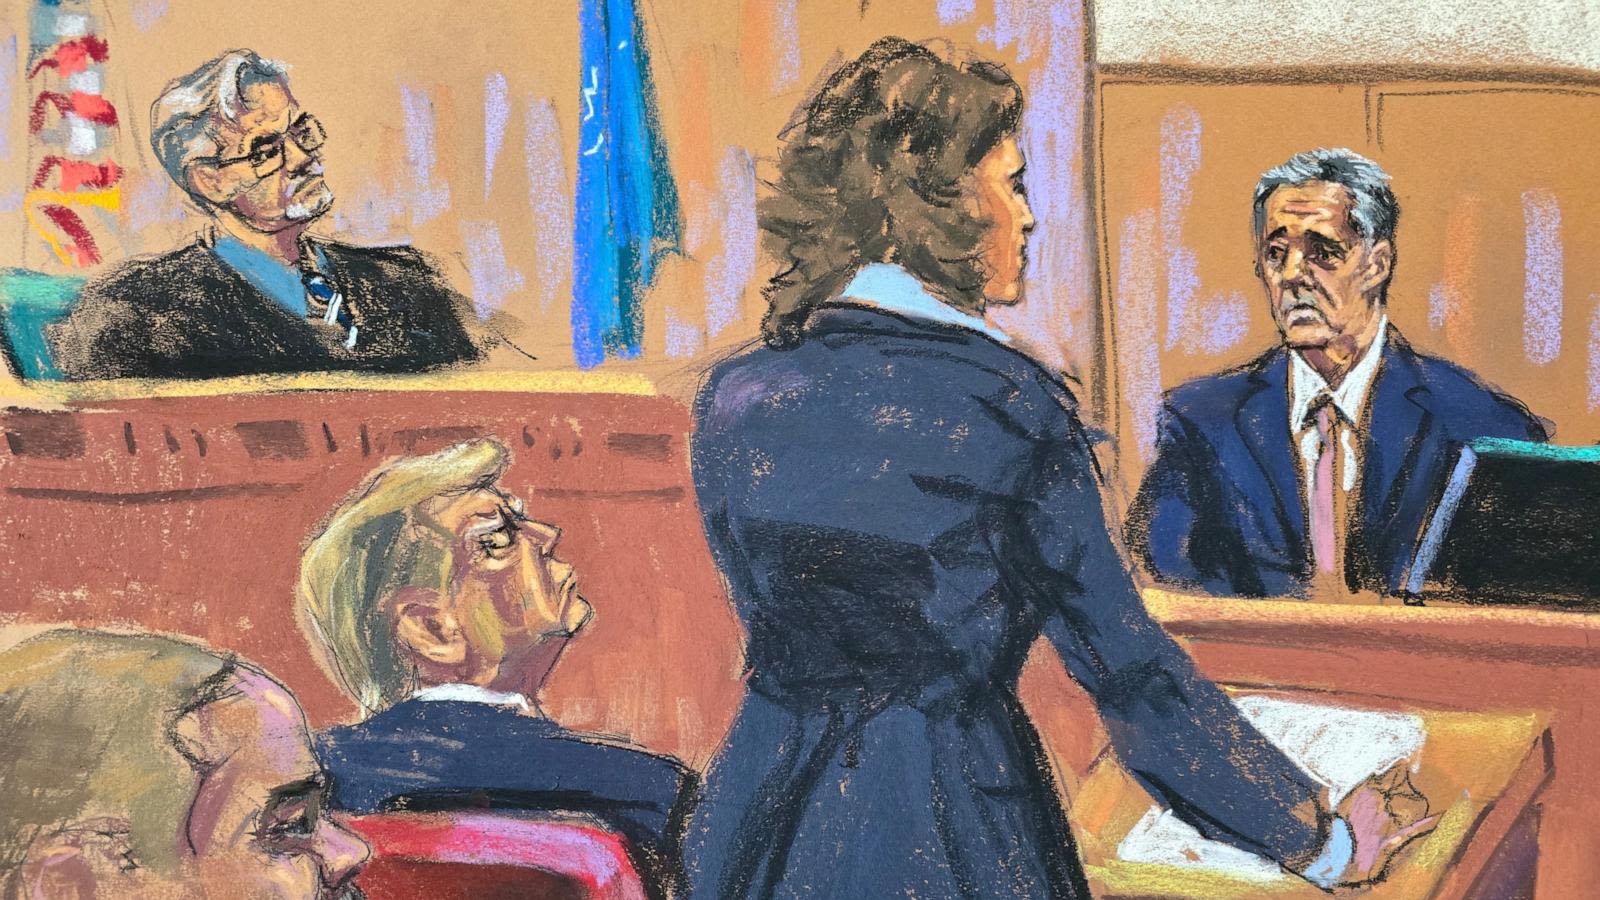 Trump trial live updates: 'Just do it,' Cohen says Trump told him about making Stormy Daniels payment